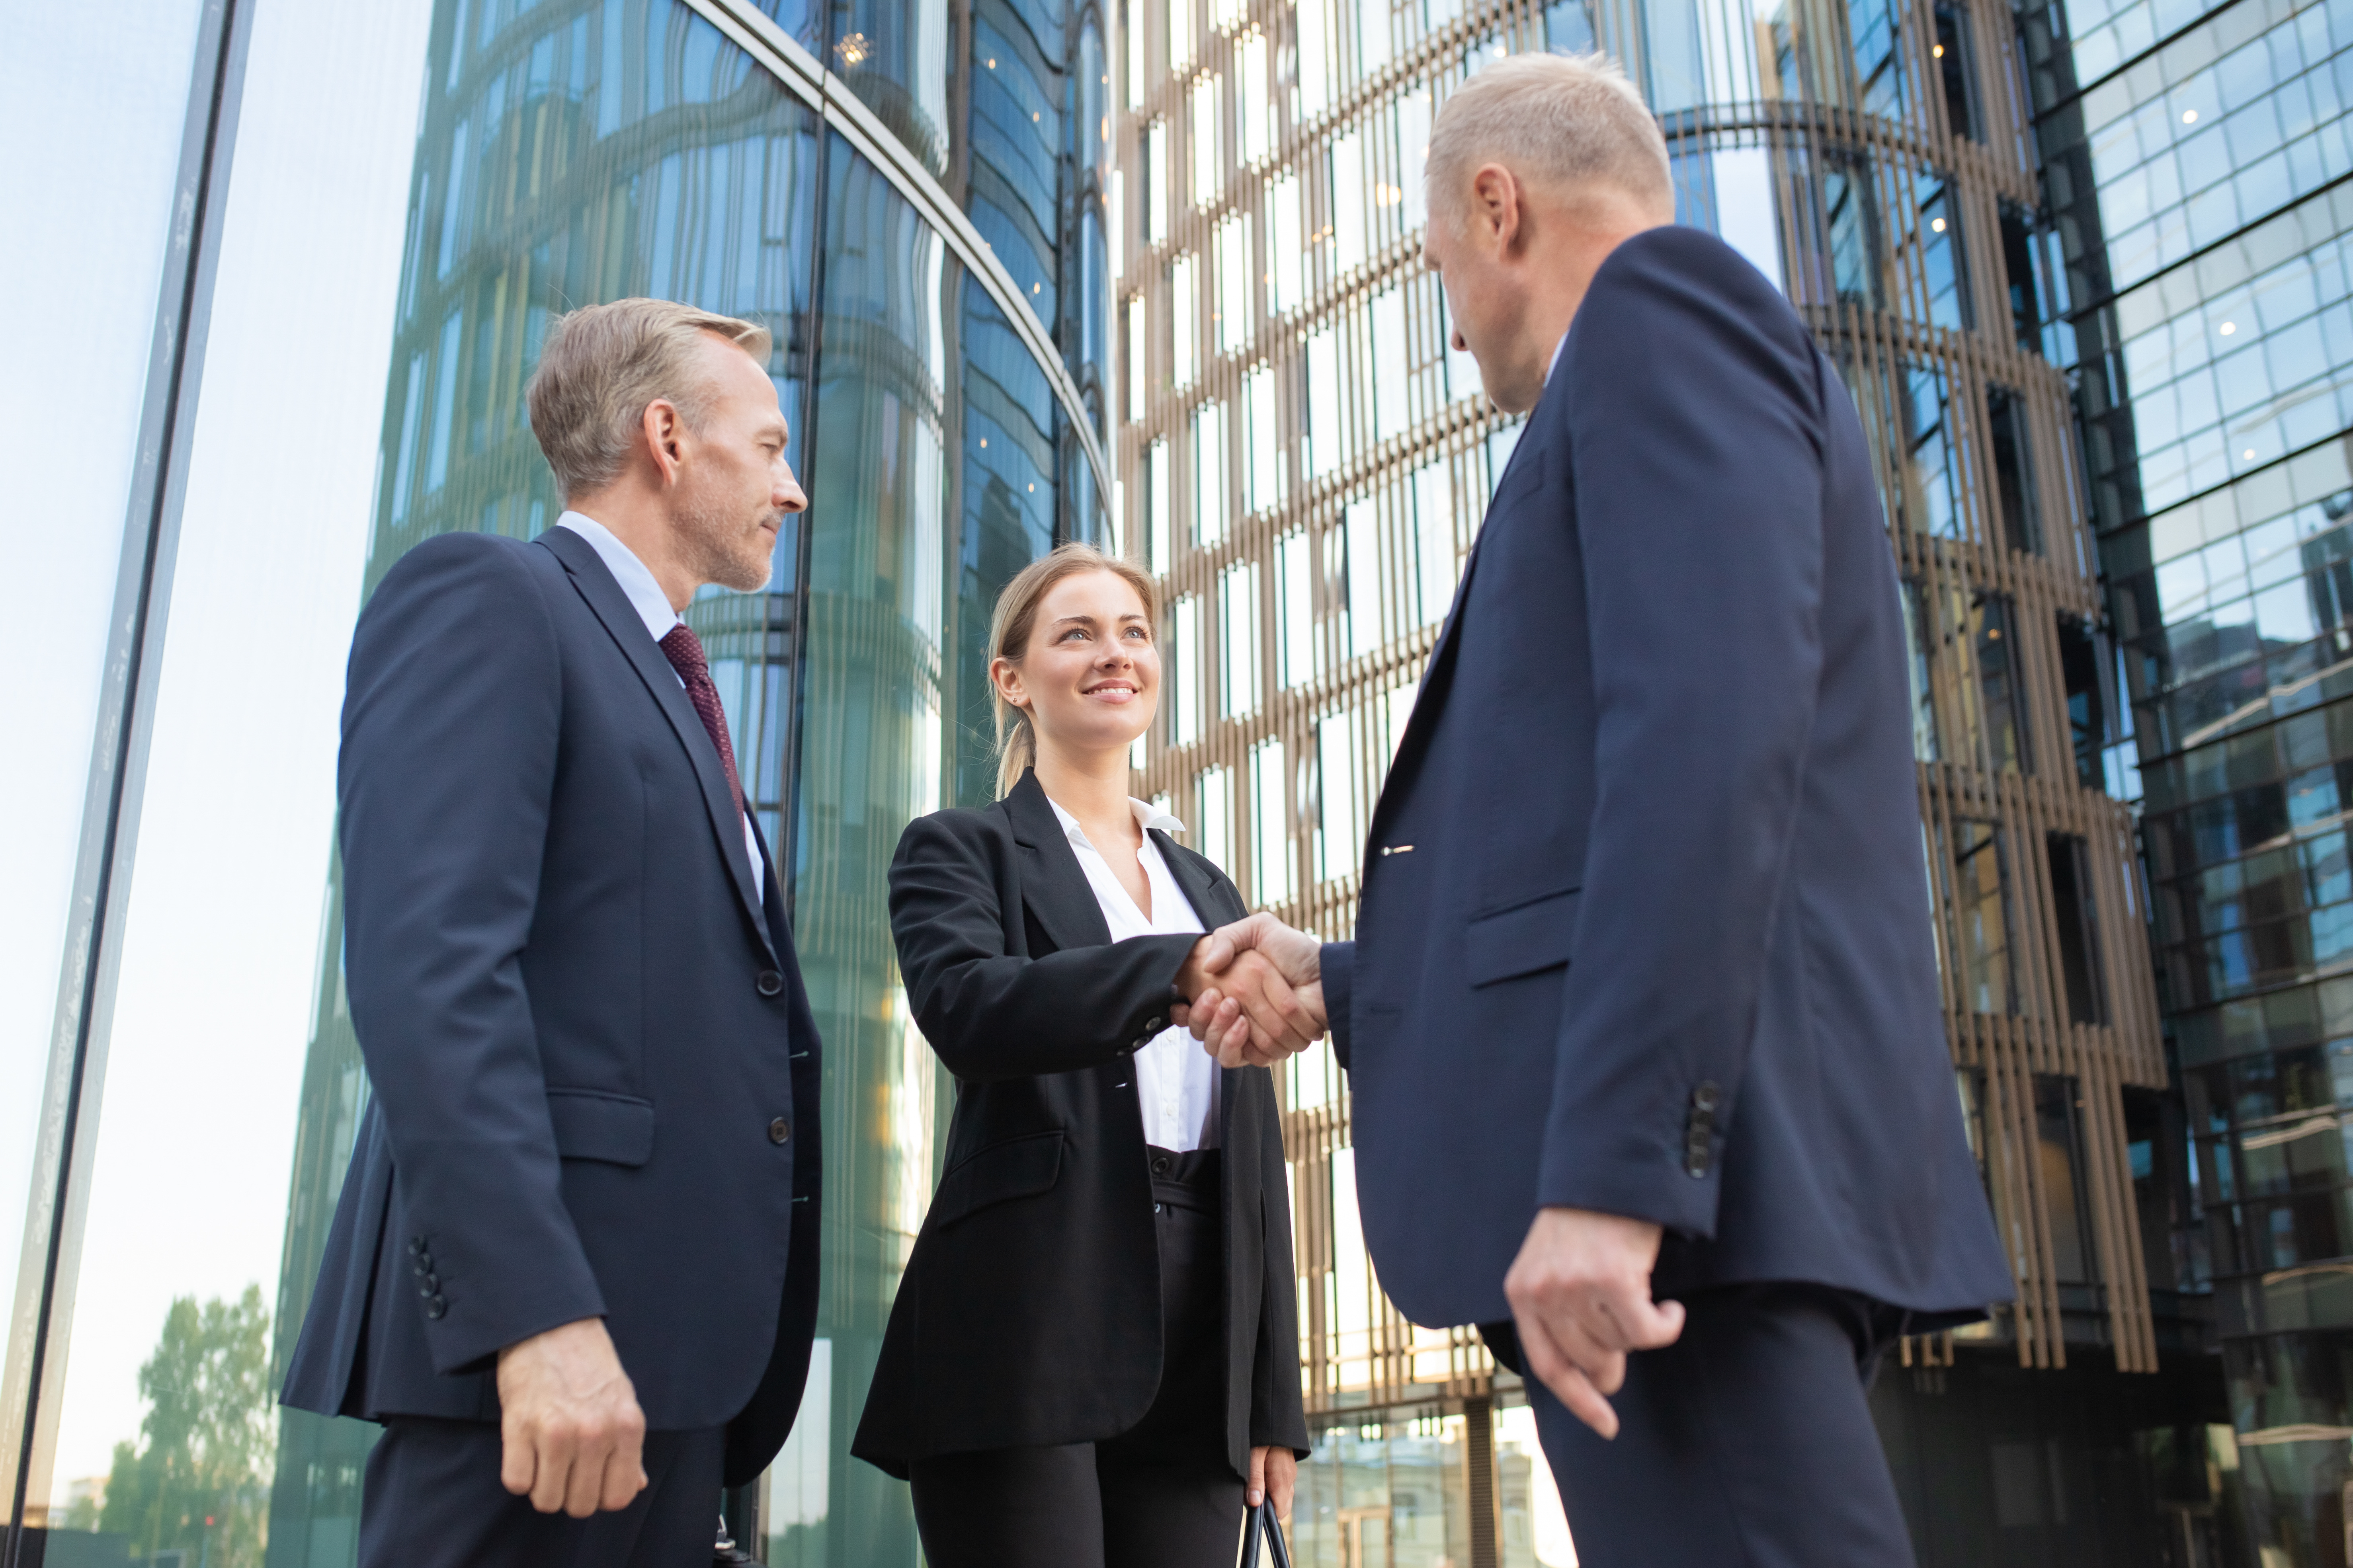 Three business people shaking hands in front of an office building.